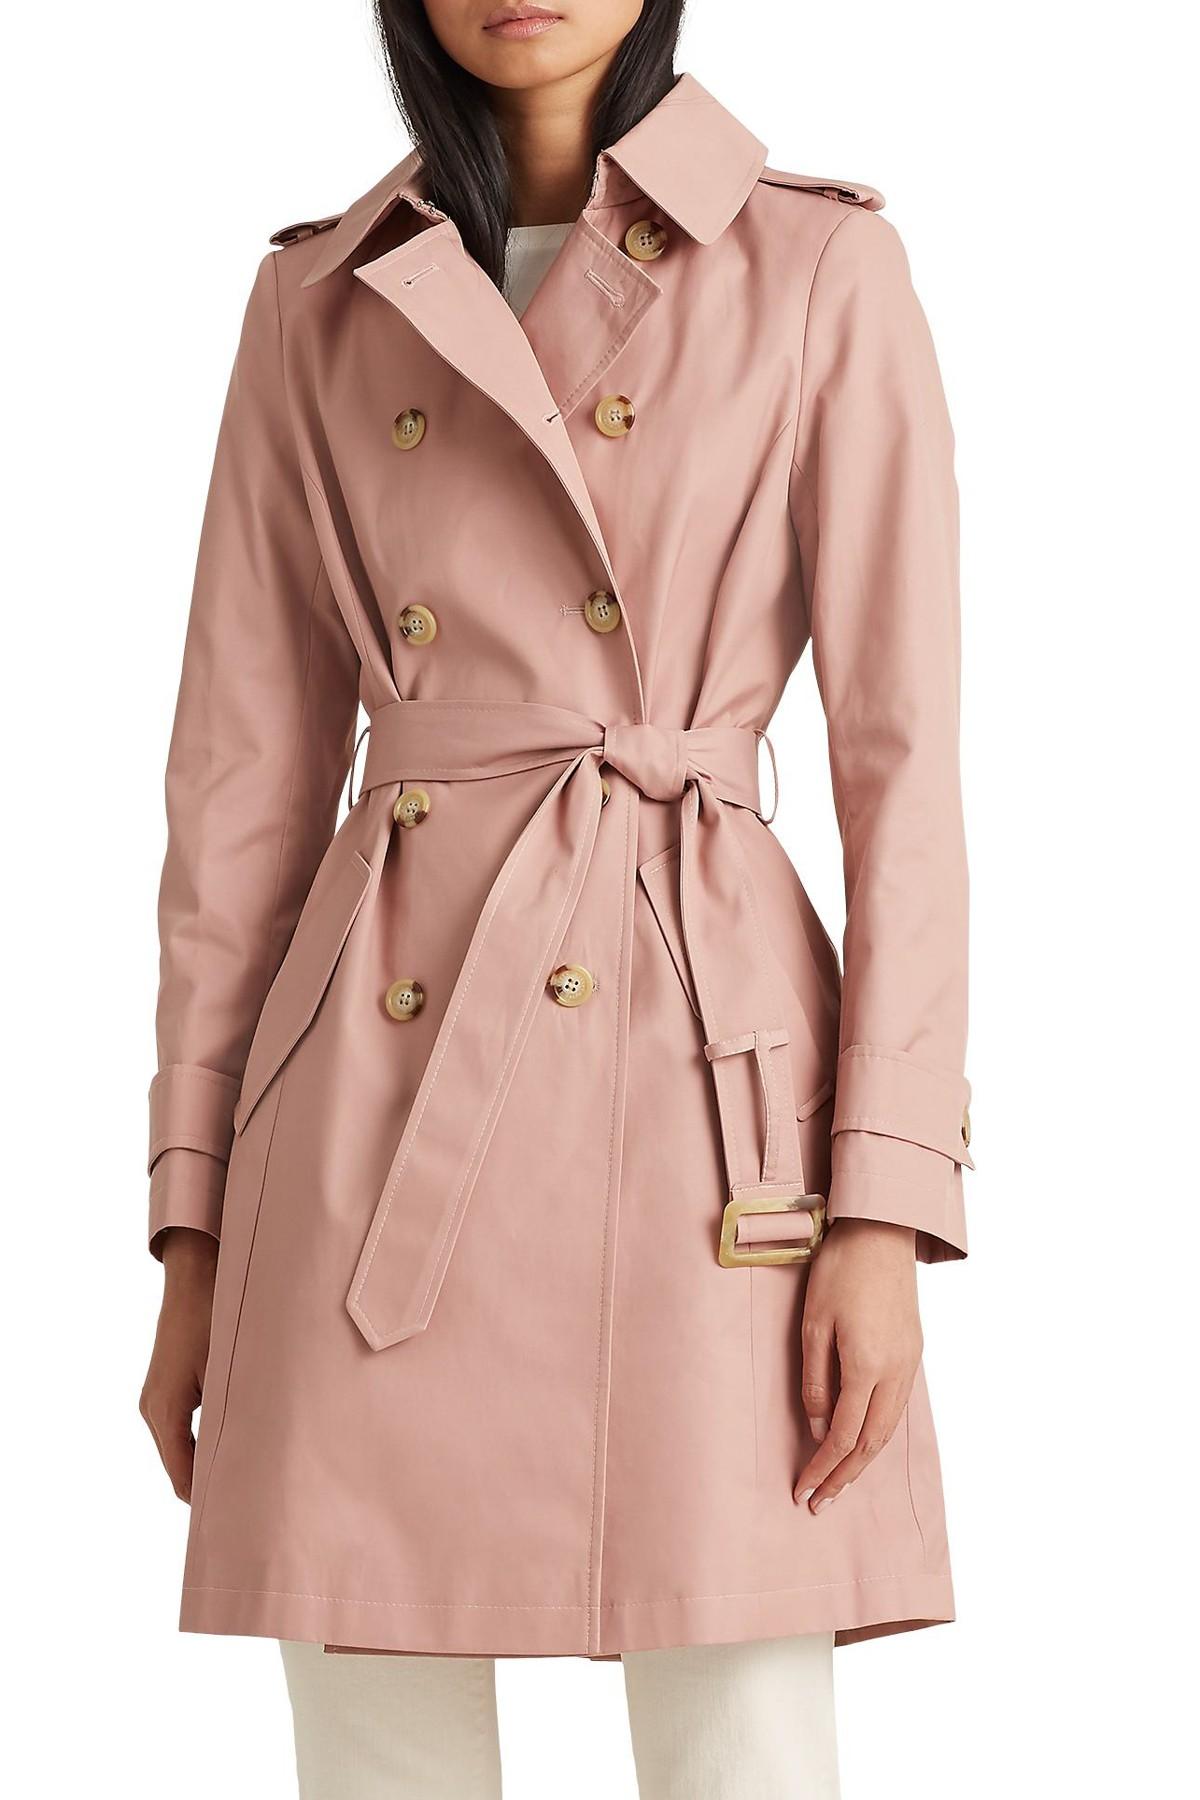 Lauren by Ralph Lauren Double Breasted Belted Trench Coat in Blush (Pink) -  Lyst